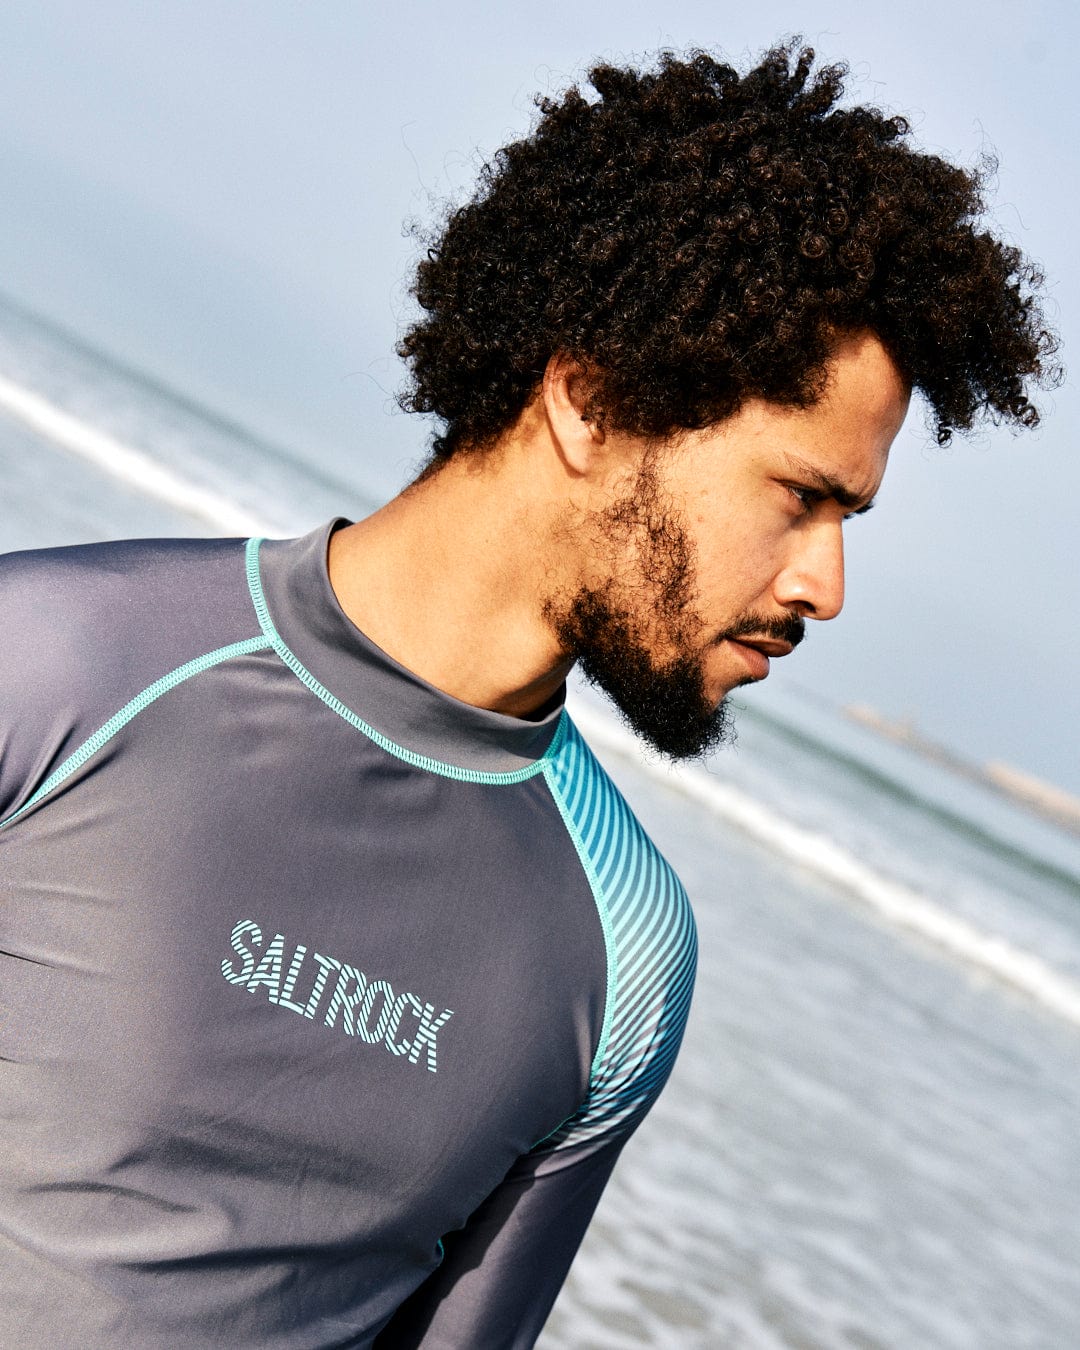 A man with curly hair wearing a Saltrock DNA Wave - Mens Long Sleeve Rashvest in Grey/Turquoise stands on a beach, looking off to the side with a focused expression.